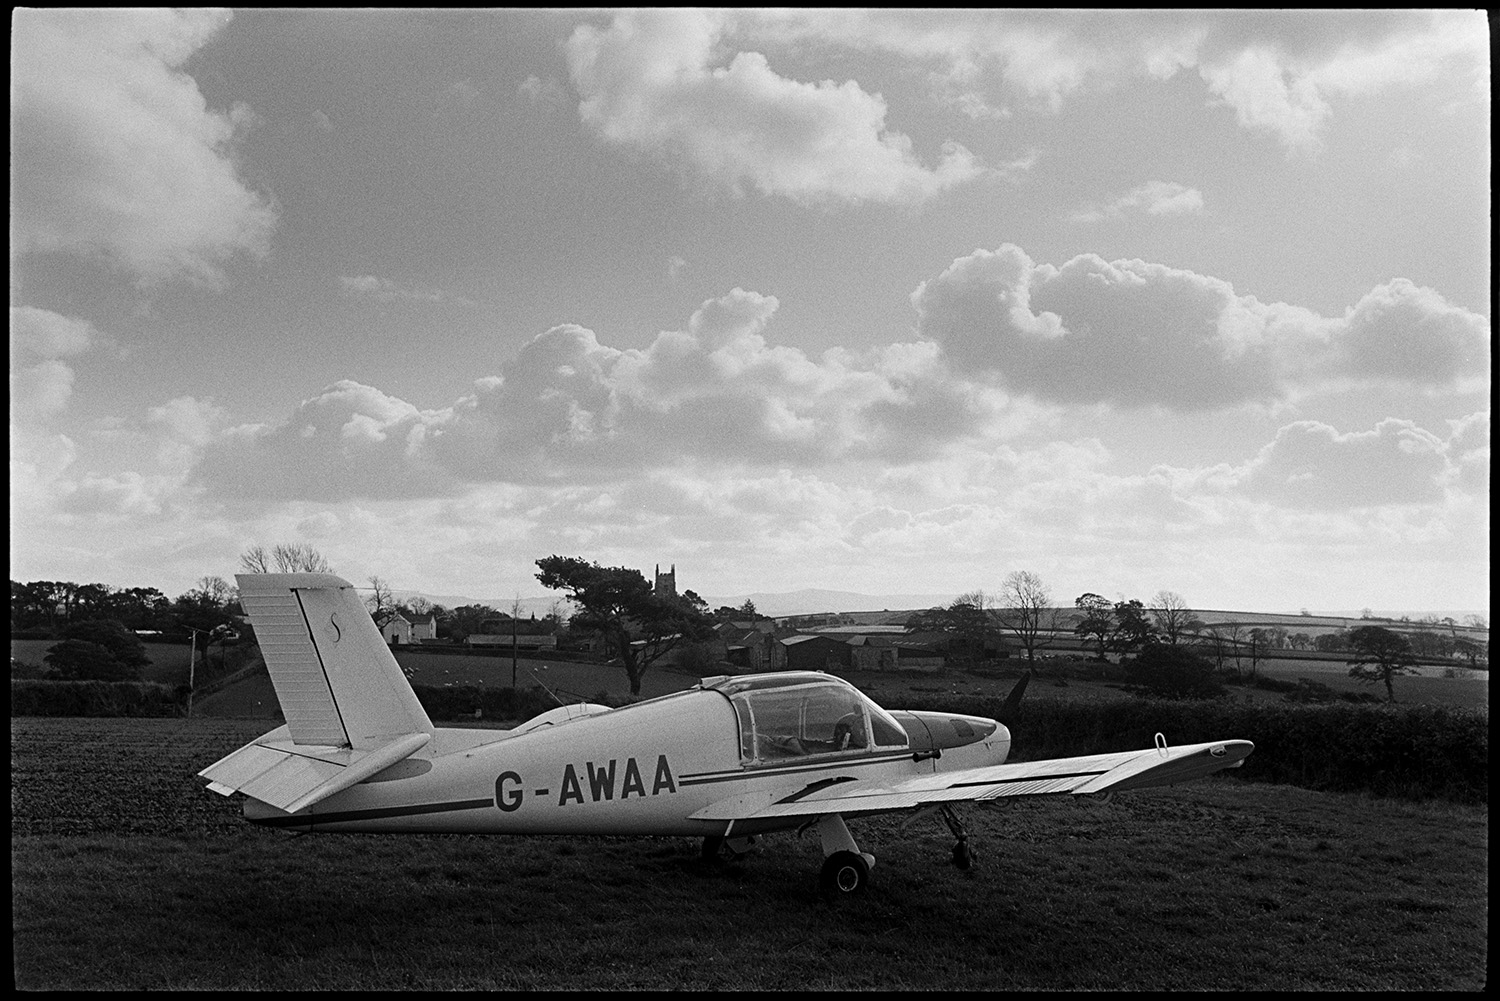 Light aeroplane parked in field, belonged to farmer.
[A light aeroplane, belonging to Mr Dunn, parked in a field at Dowland. Dowland church tower is visible in the background, with farm buildings and houses. Dartmoor is also visible in the far distance, under a cloudy sky.]